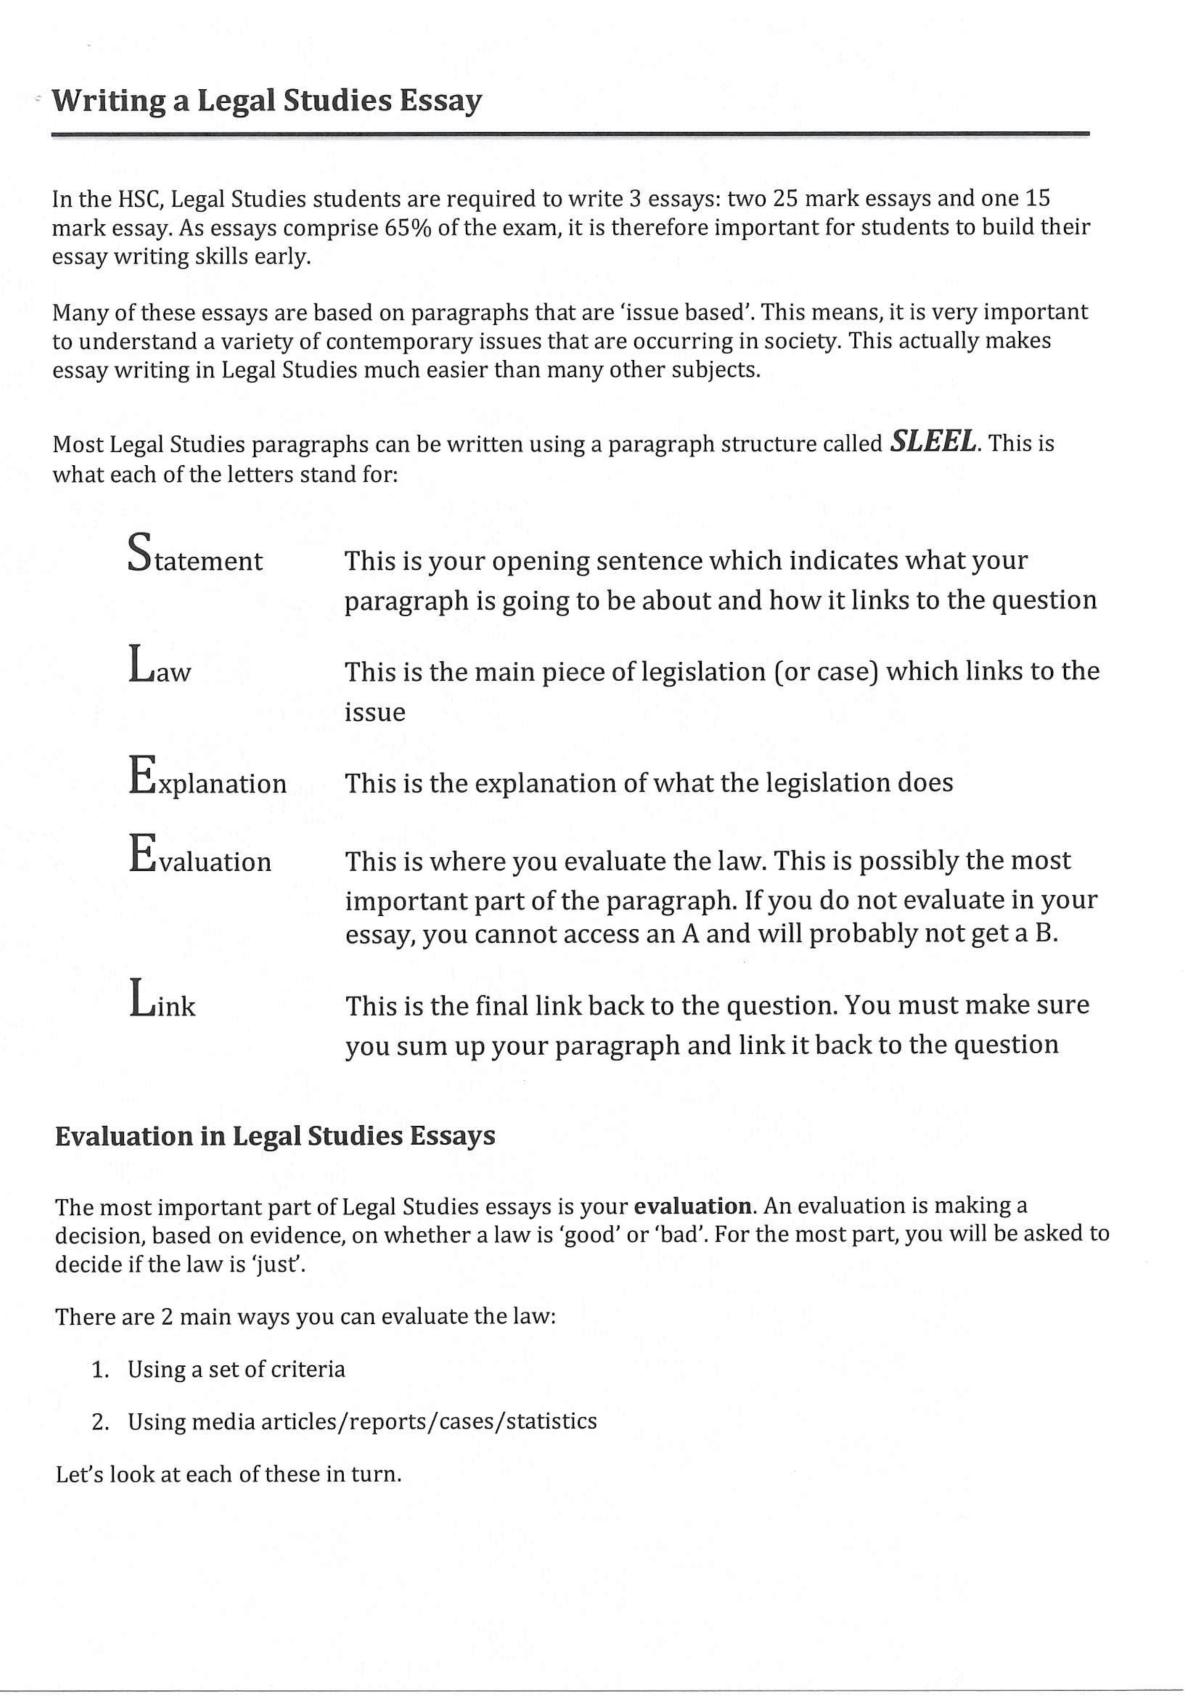 how to write a legal research paper